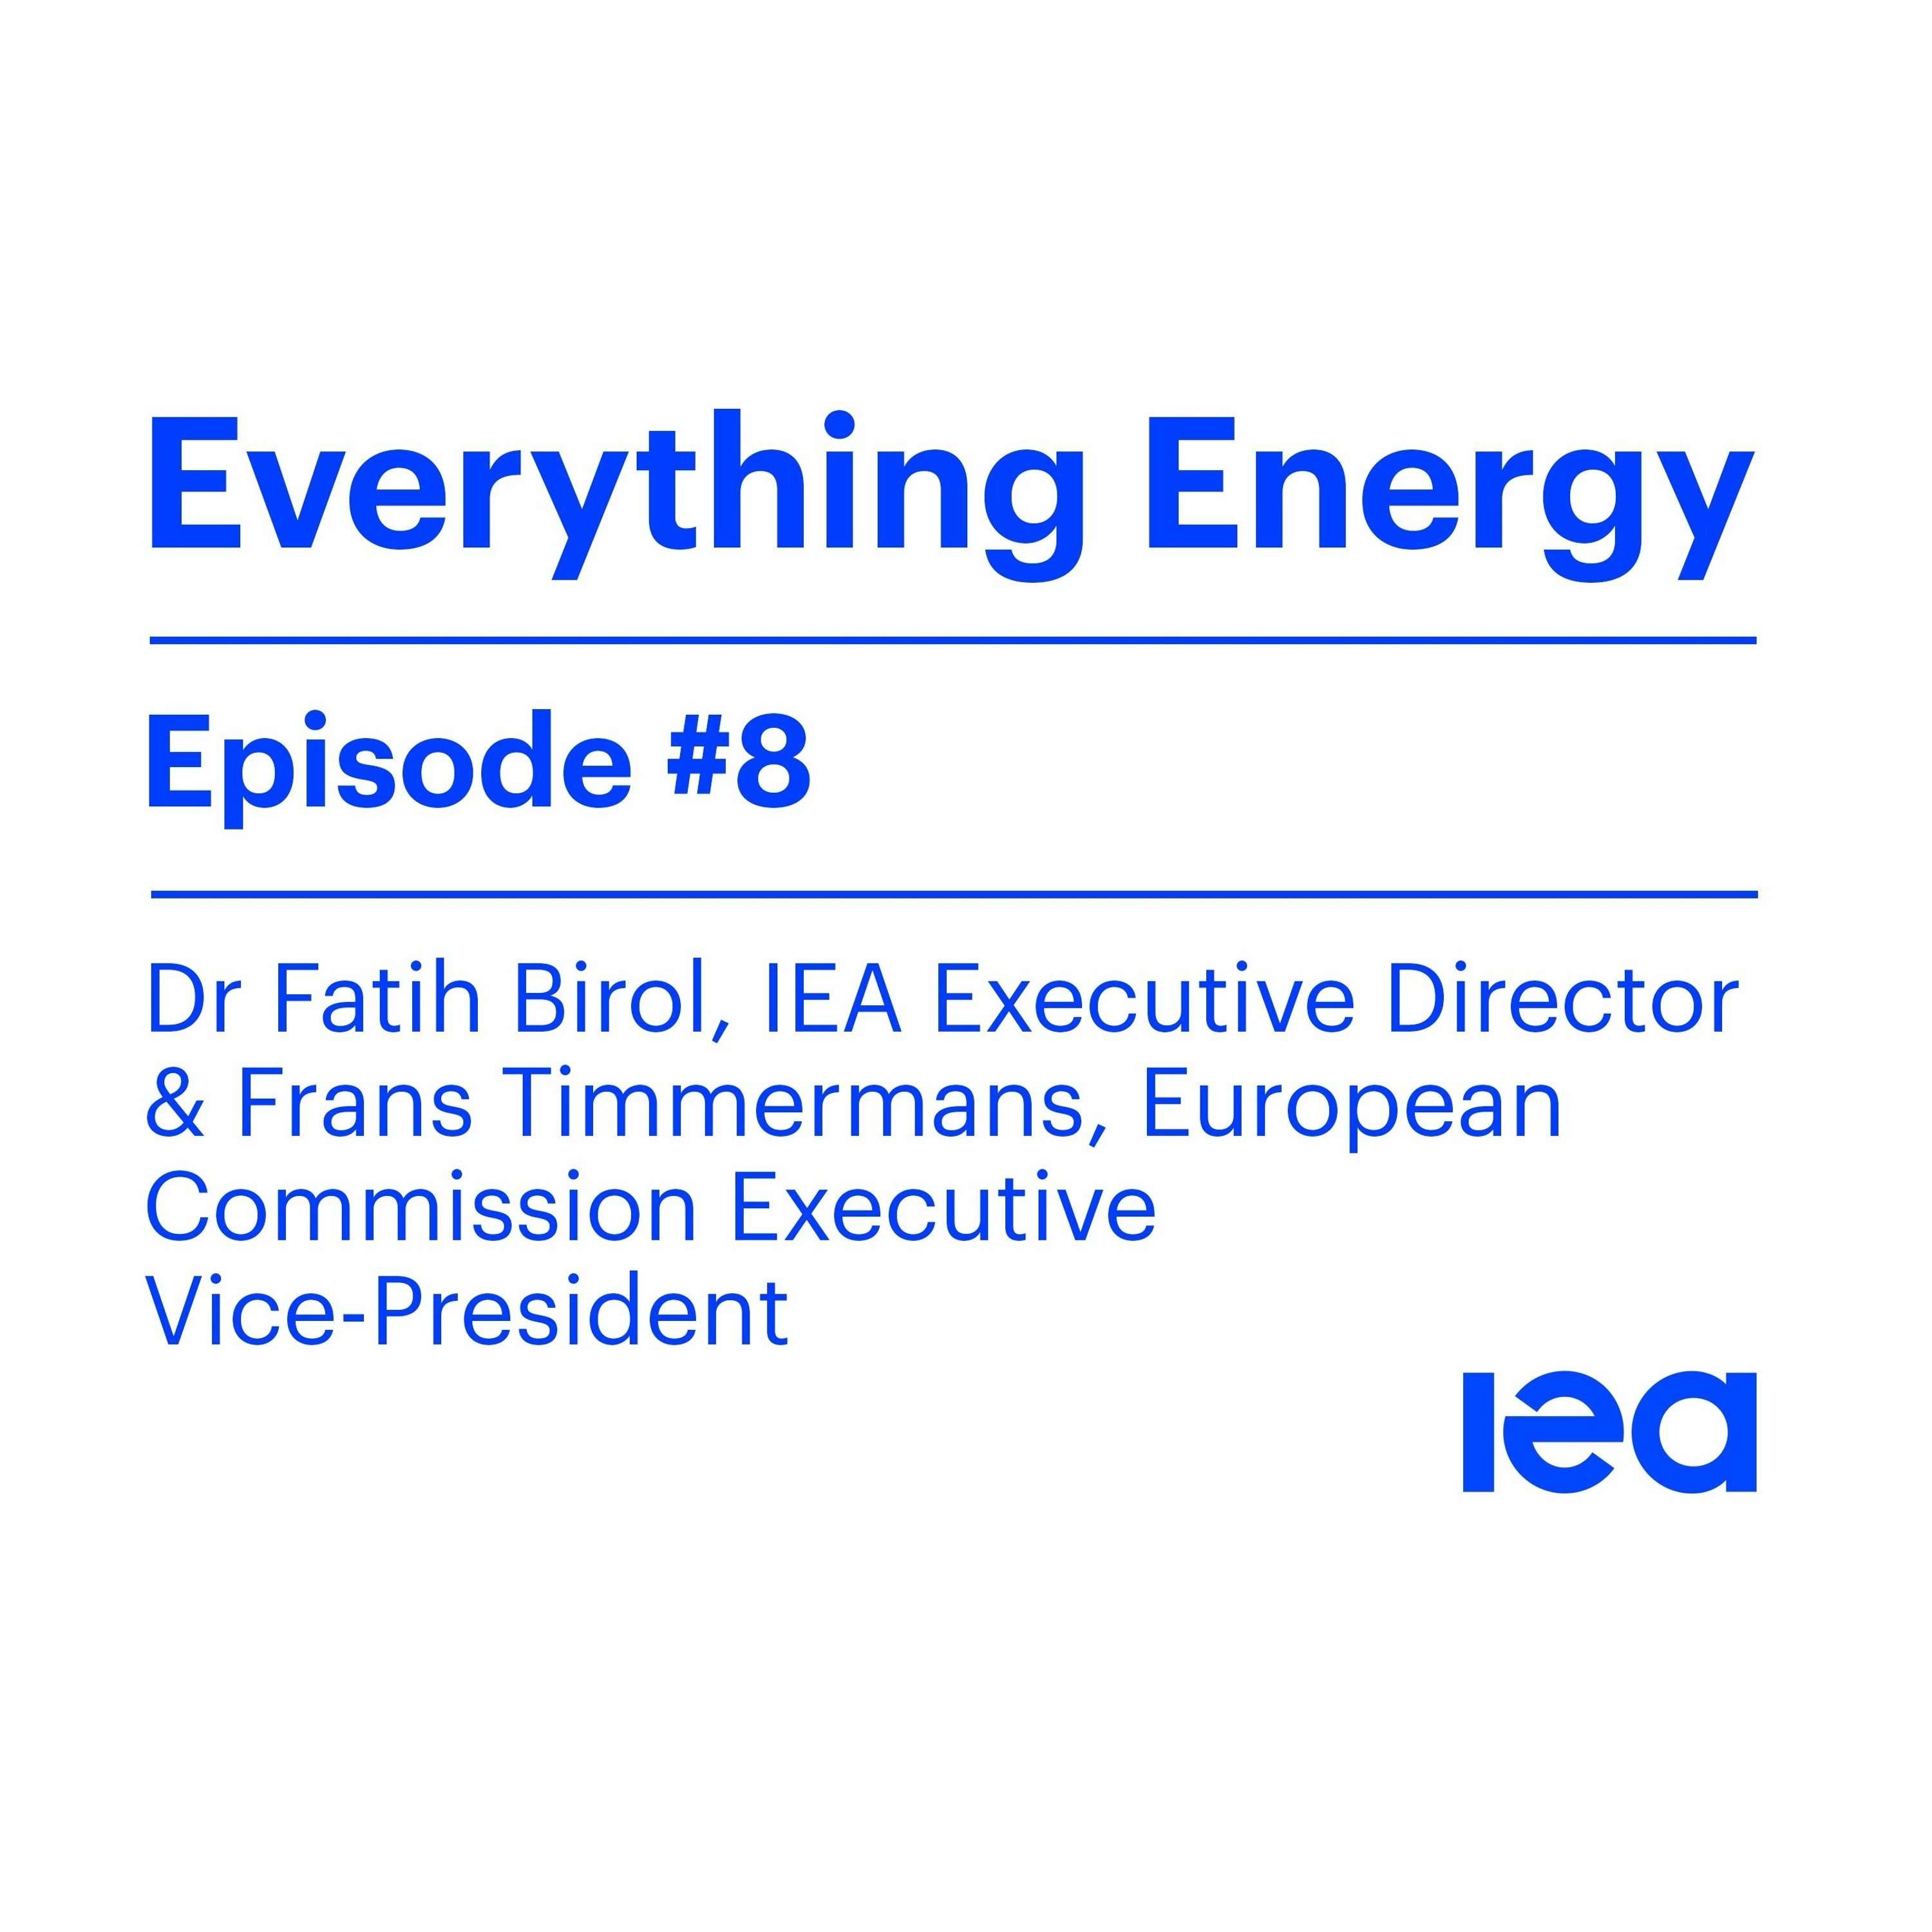 Episode 8: Next steps for the European Green Deal with Dr Fatih Birol & Frans Timmermans